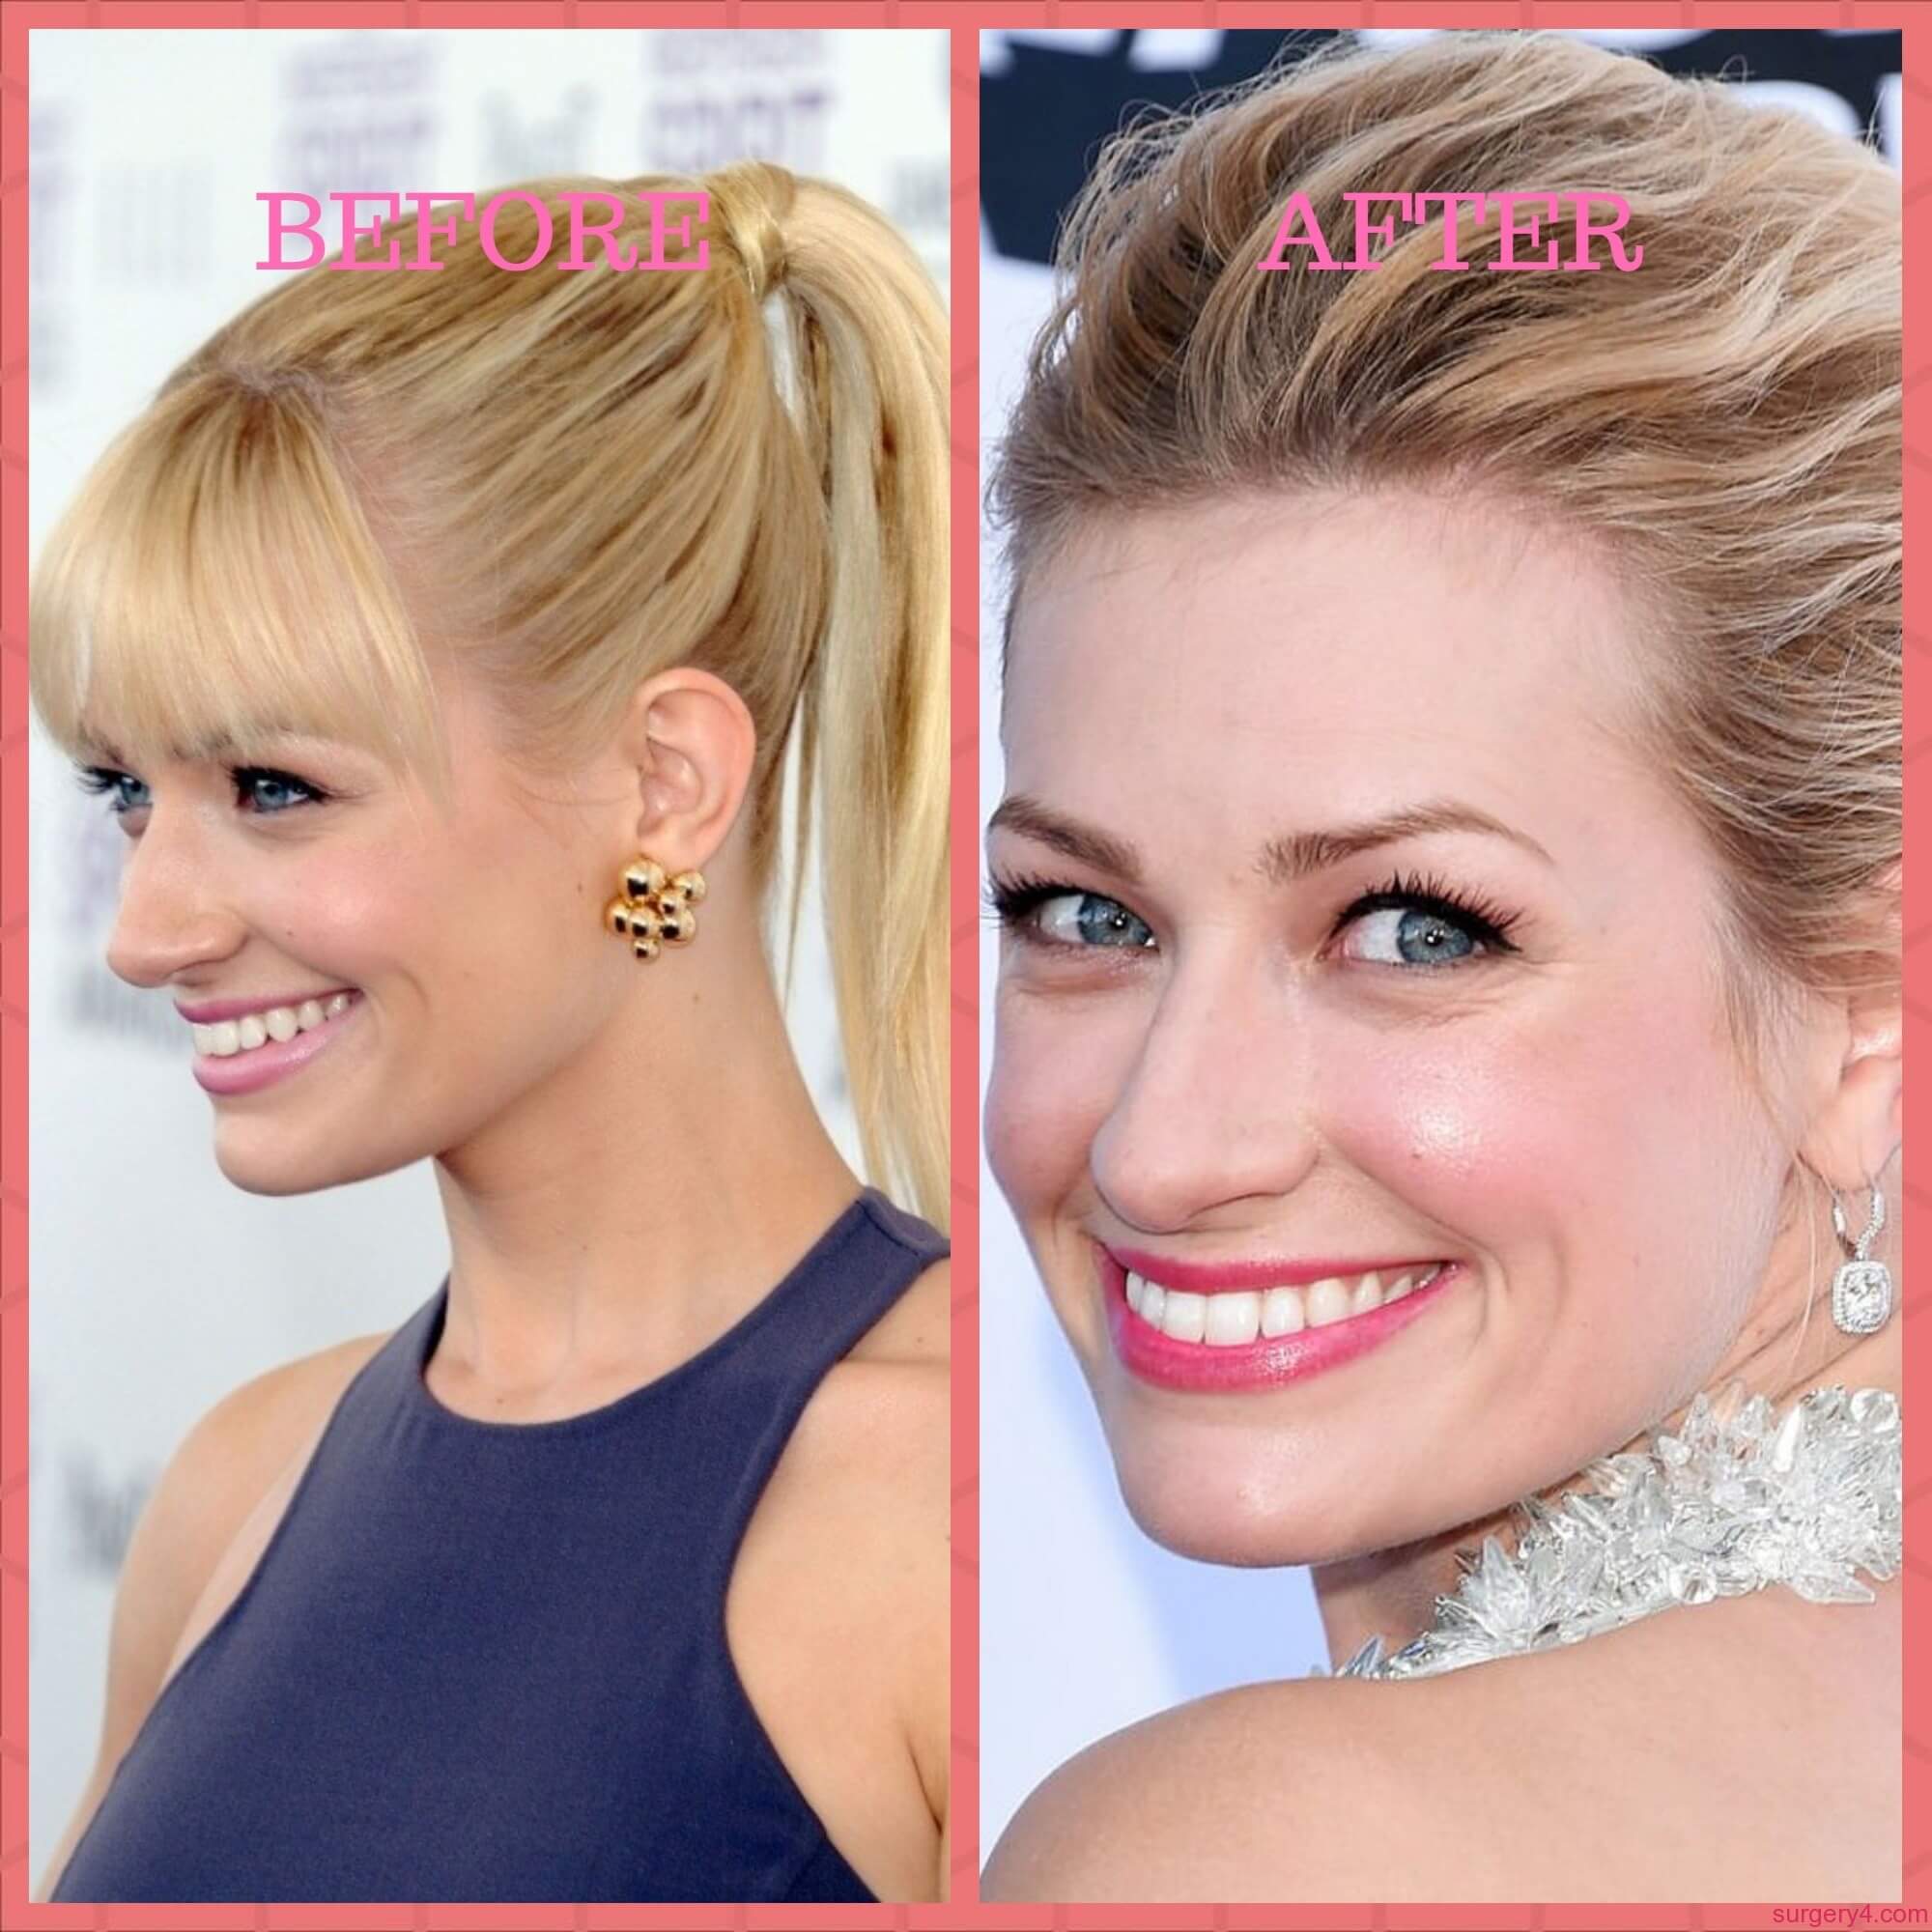 Beth Behrs Plastic Surgery Photos [Before & After] ⋆ Surgery4